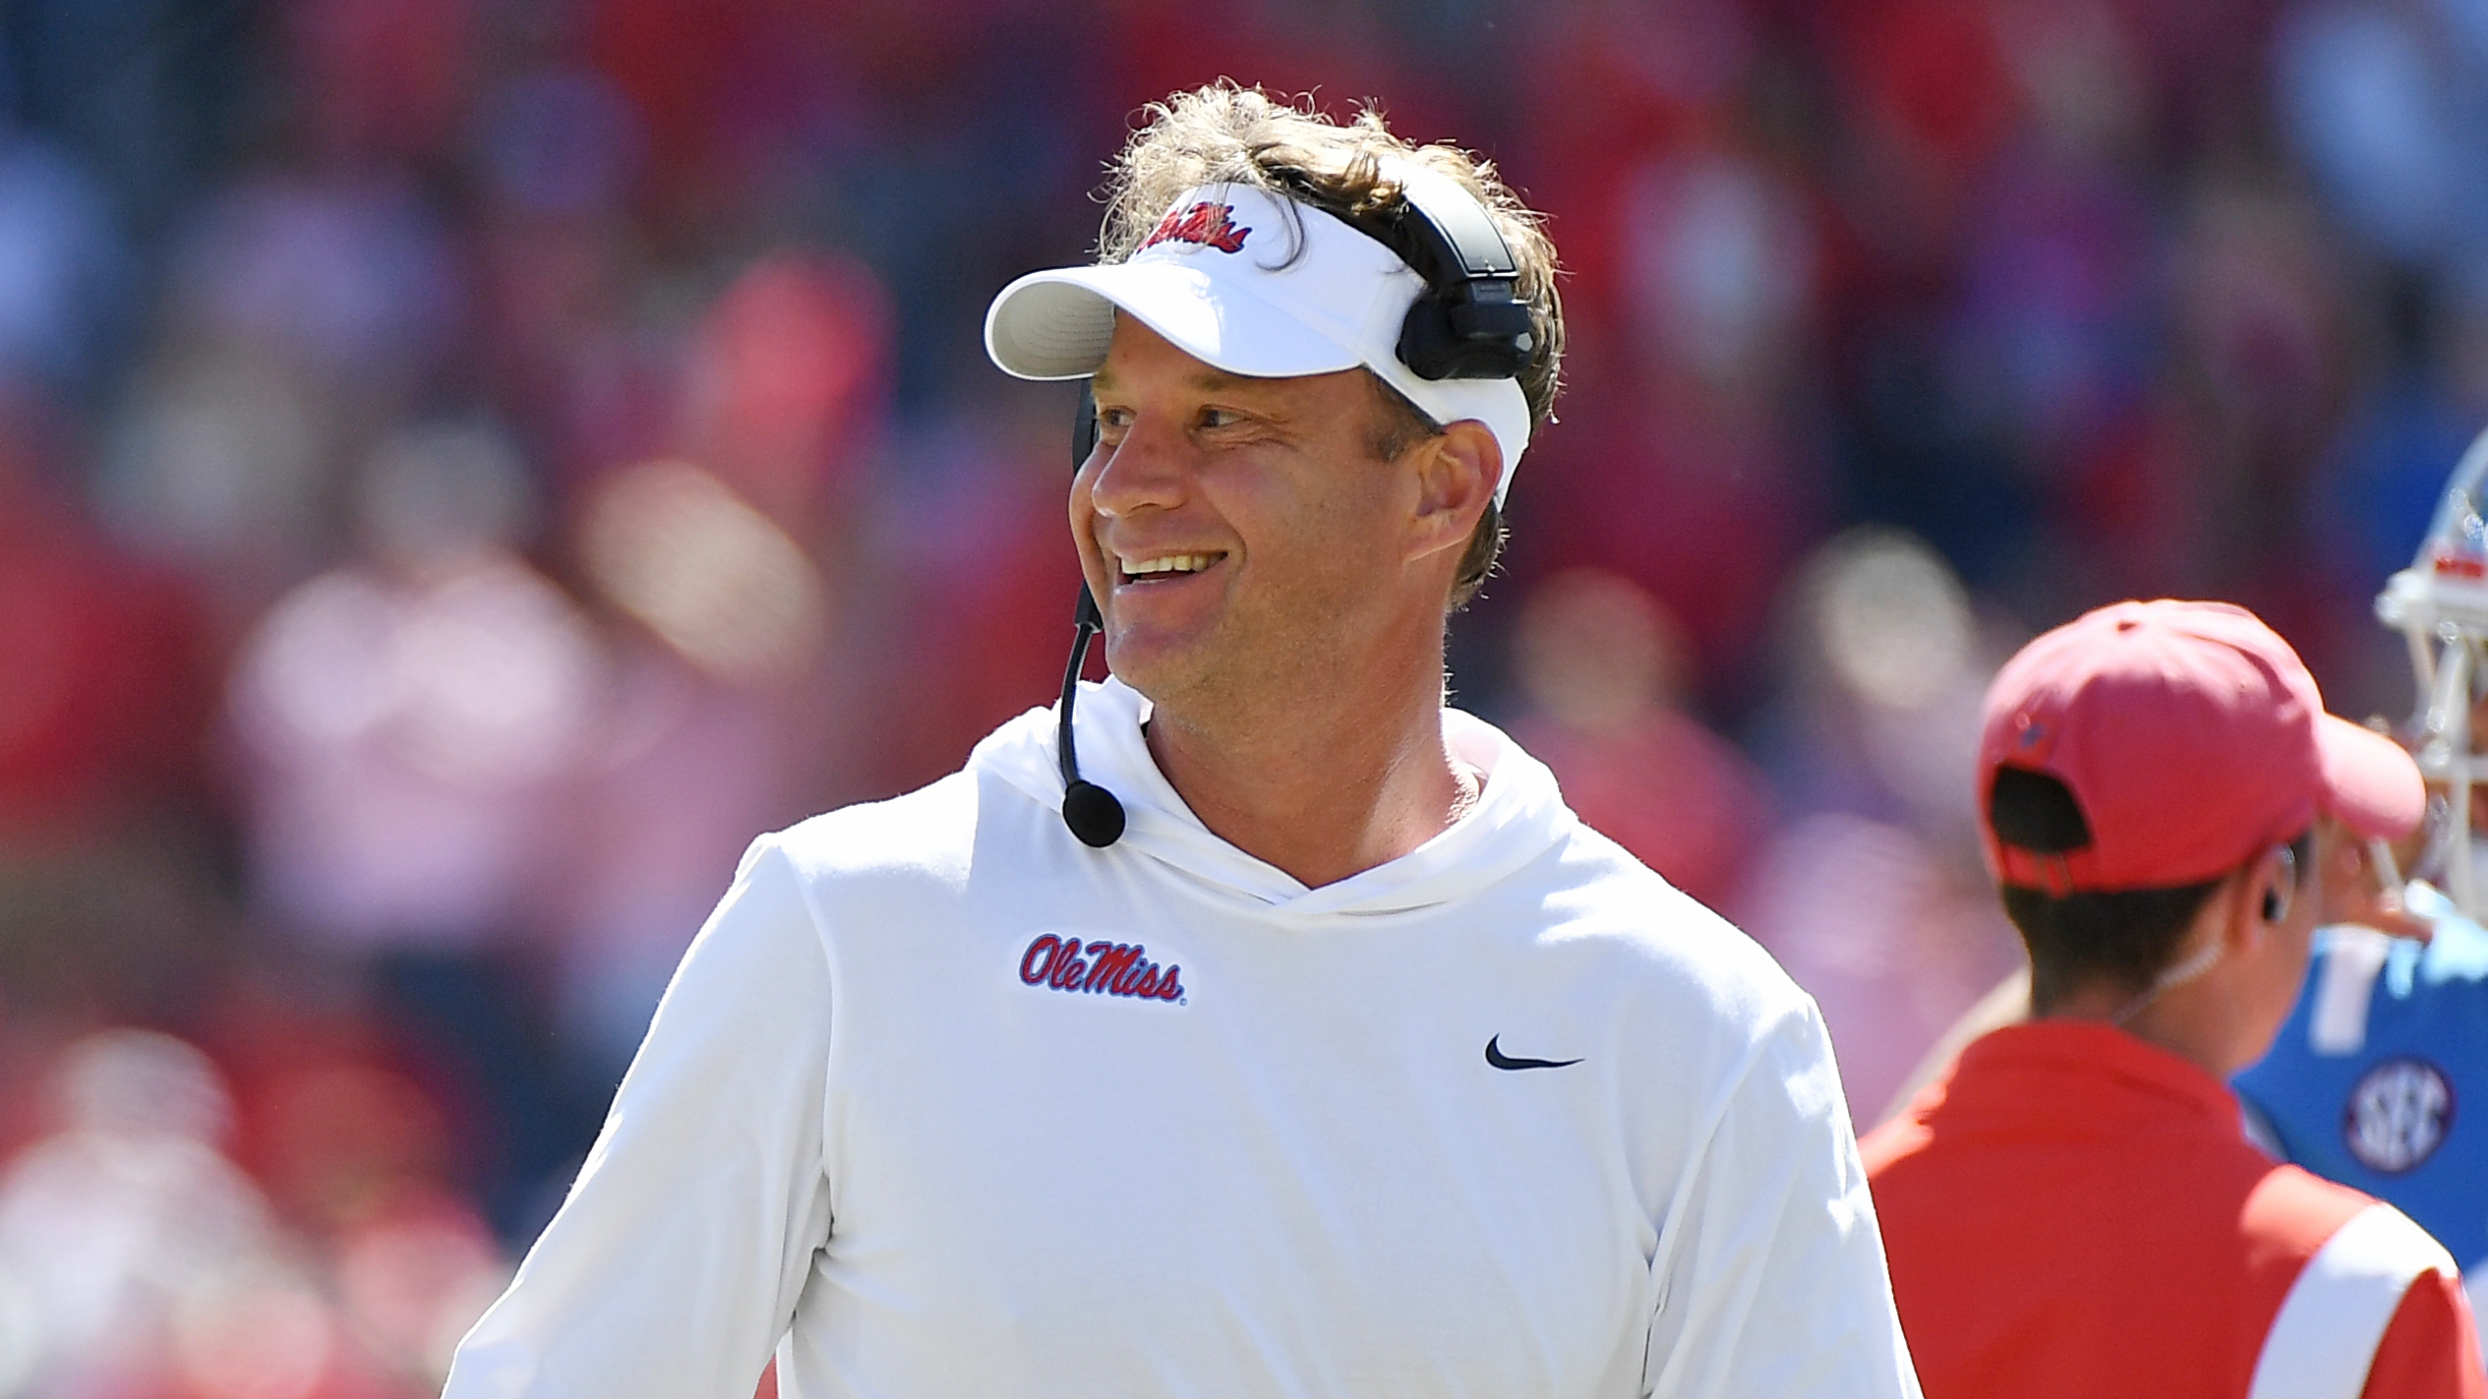 Lane Kiffin has been at the top of many programs’ coaching search lists. Auburn will be no different.